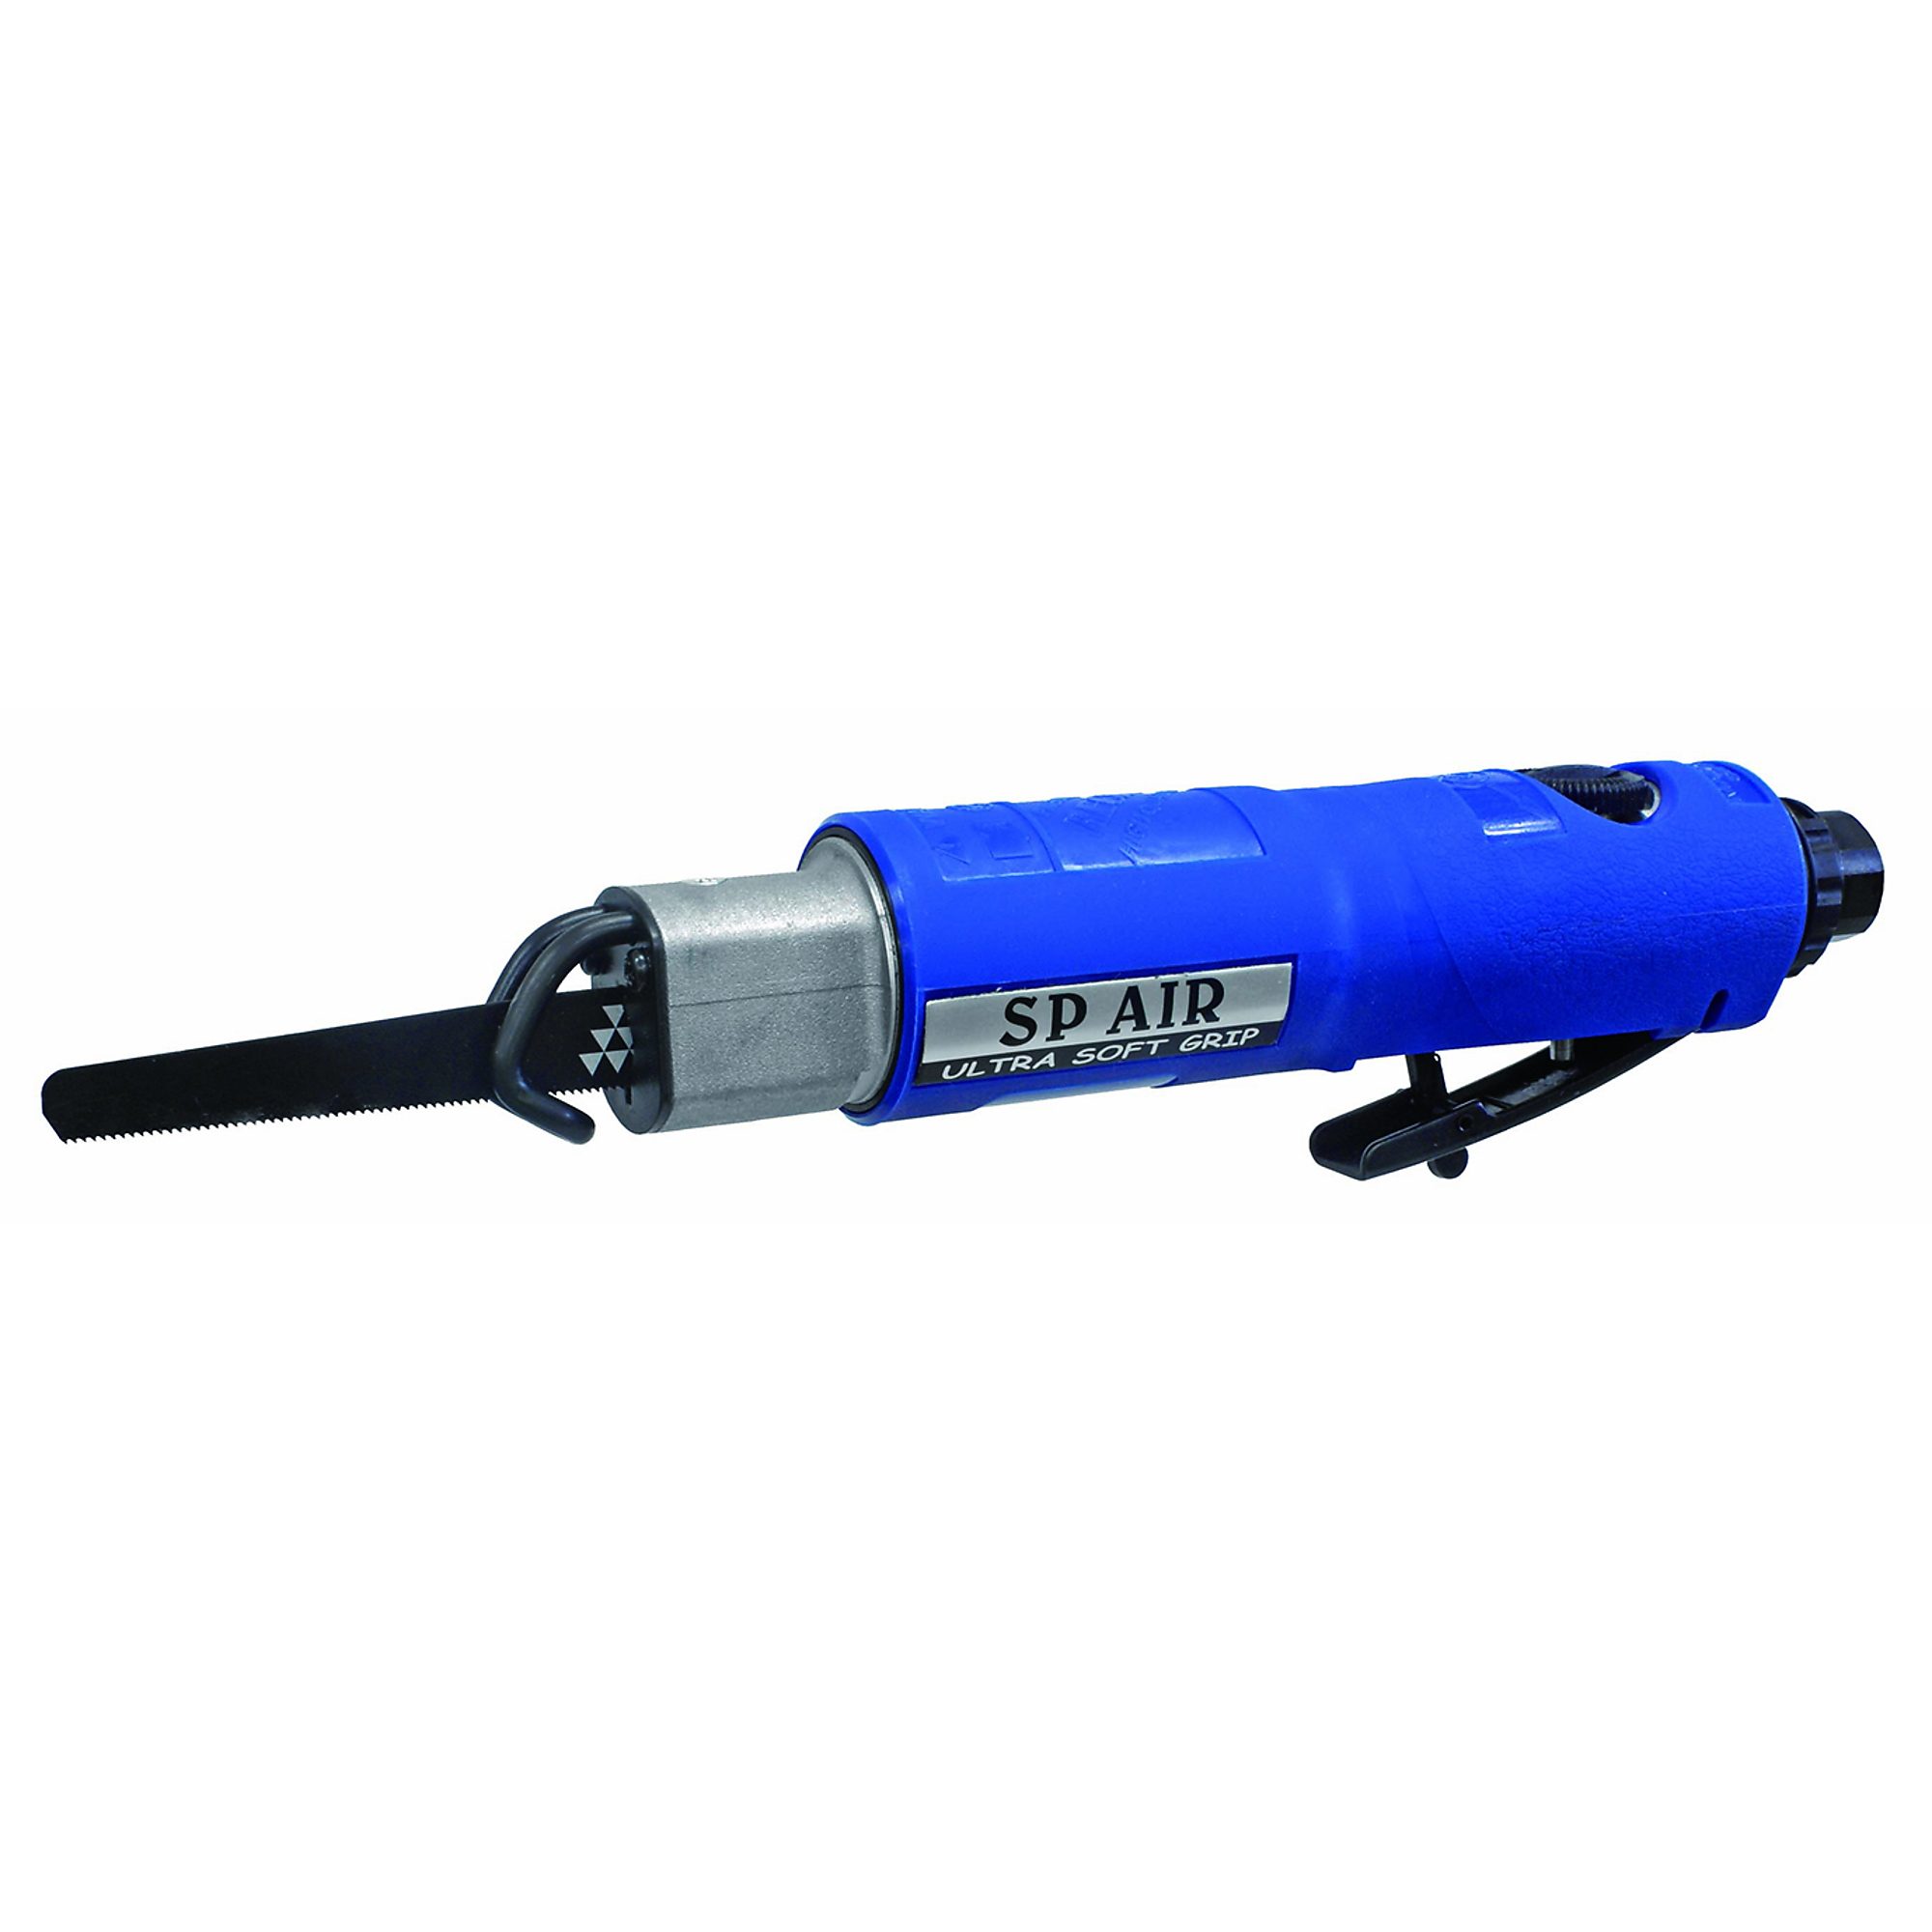 SP Air, RECIPRO SAW ( GEAR TYPE), Strokes Per Minute 5300, Model SP-7610